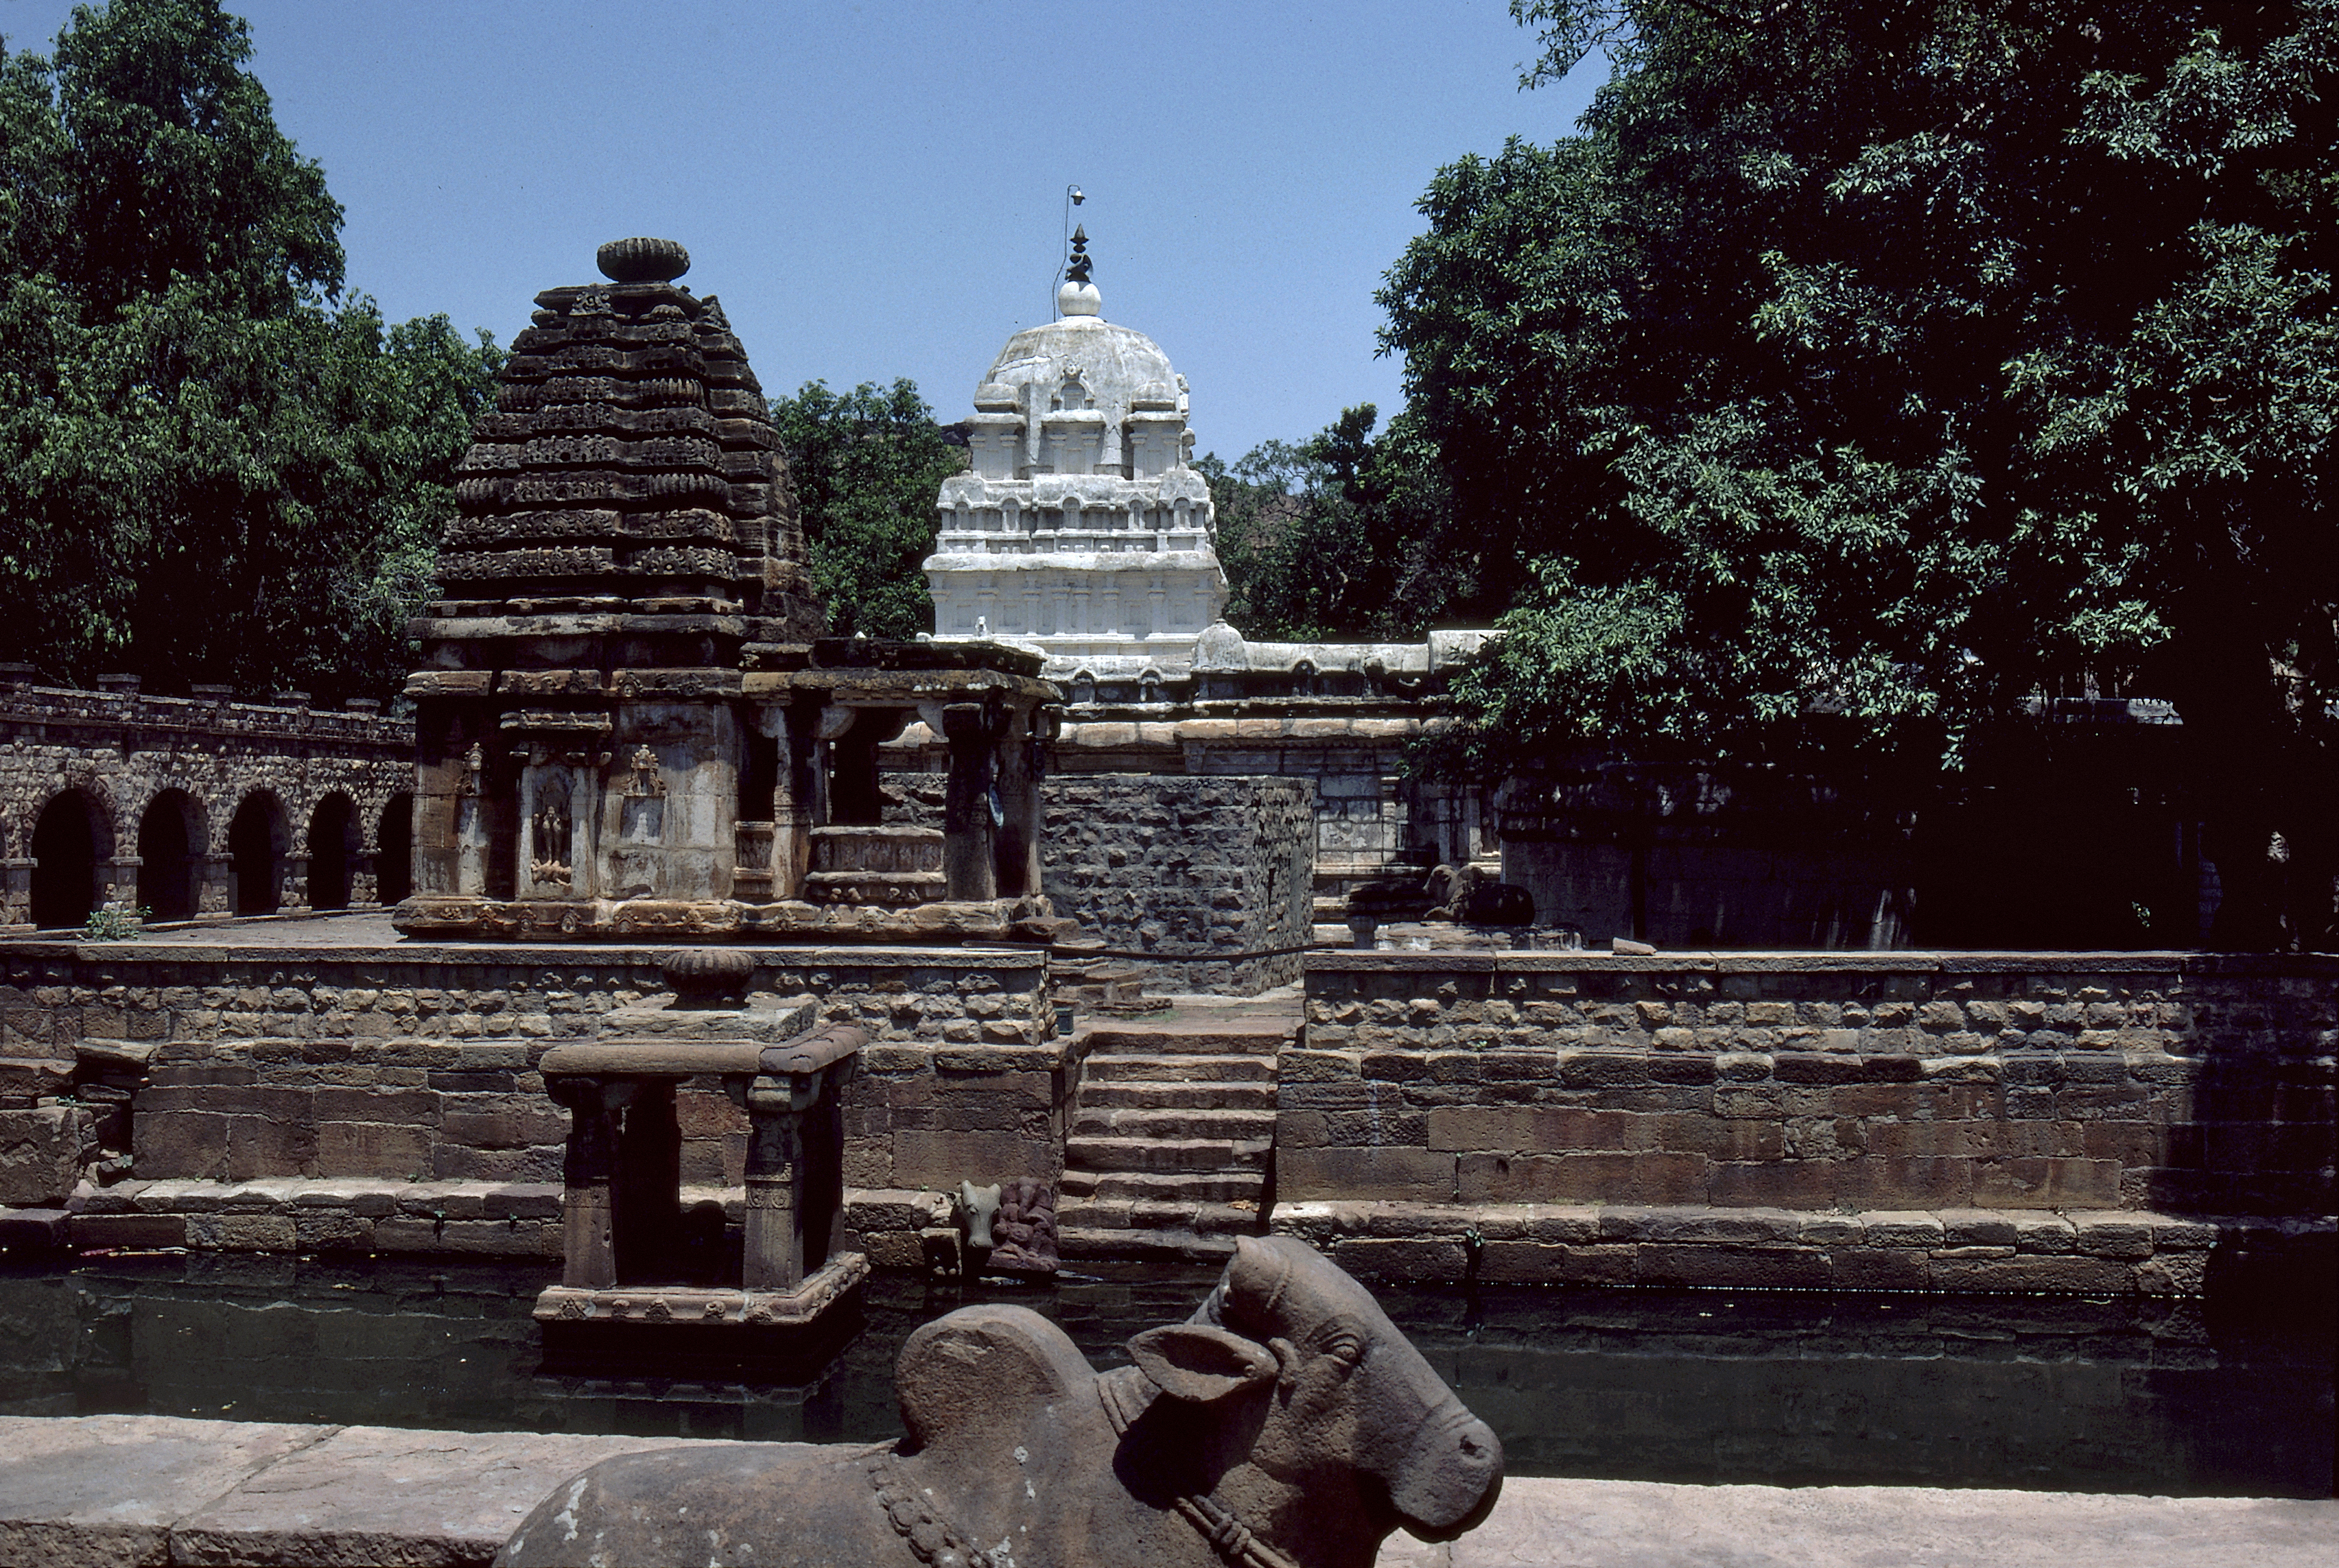 Pandukeshwar, Architectural Knowledge, and an Idea of India